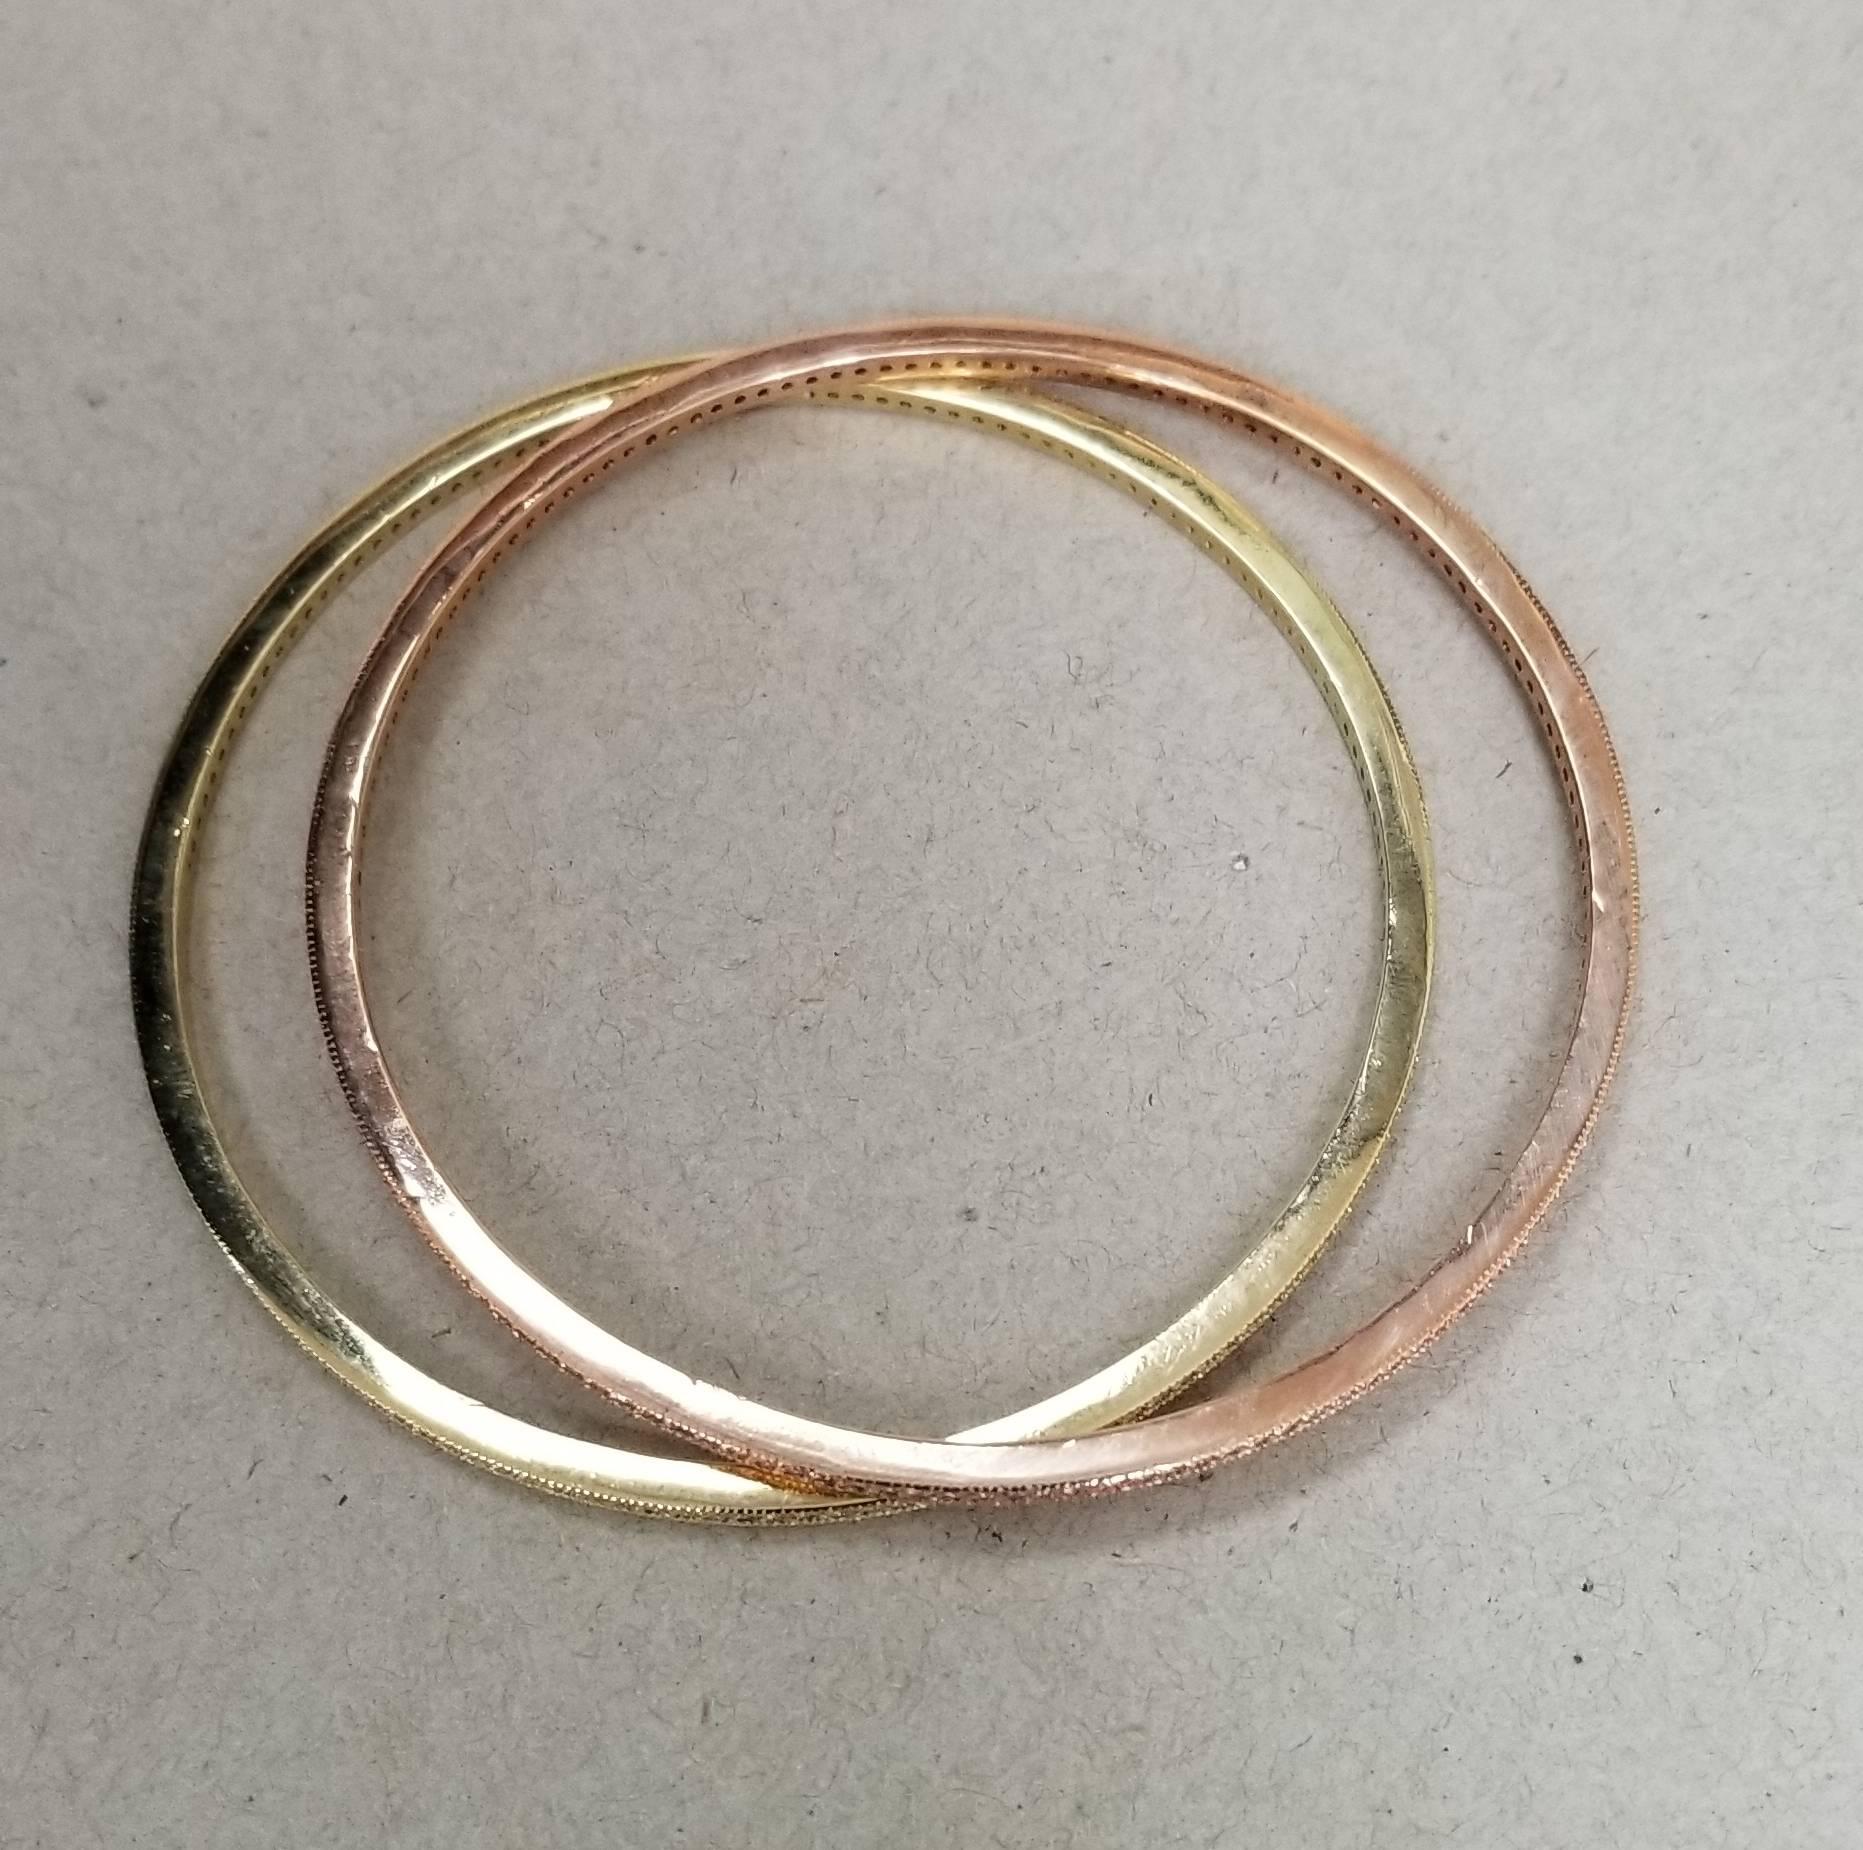 14k rose gold and 14k yellow gold diamond bangle with 142 round full cut diamonds of very fine quality weighing 1.50cts. They are prong set and have milgraining on the sides. 2 Separate bangles with an inside diameter of 2 1/2 inches.  Bangles could